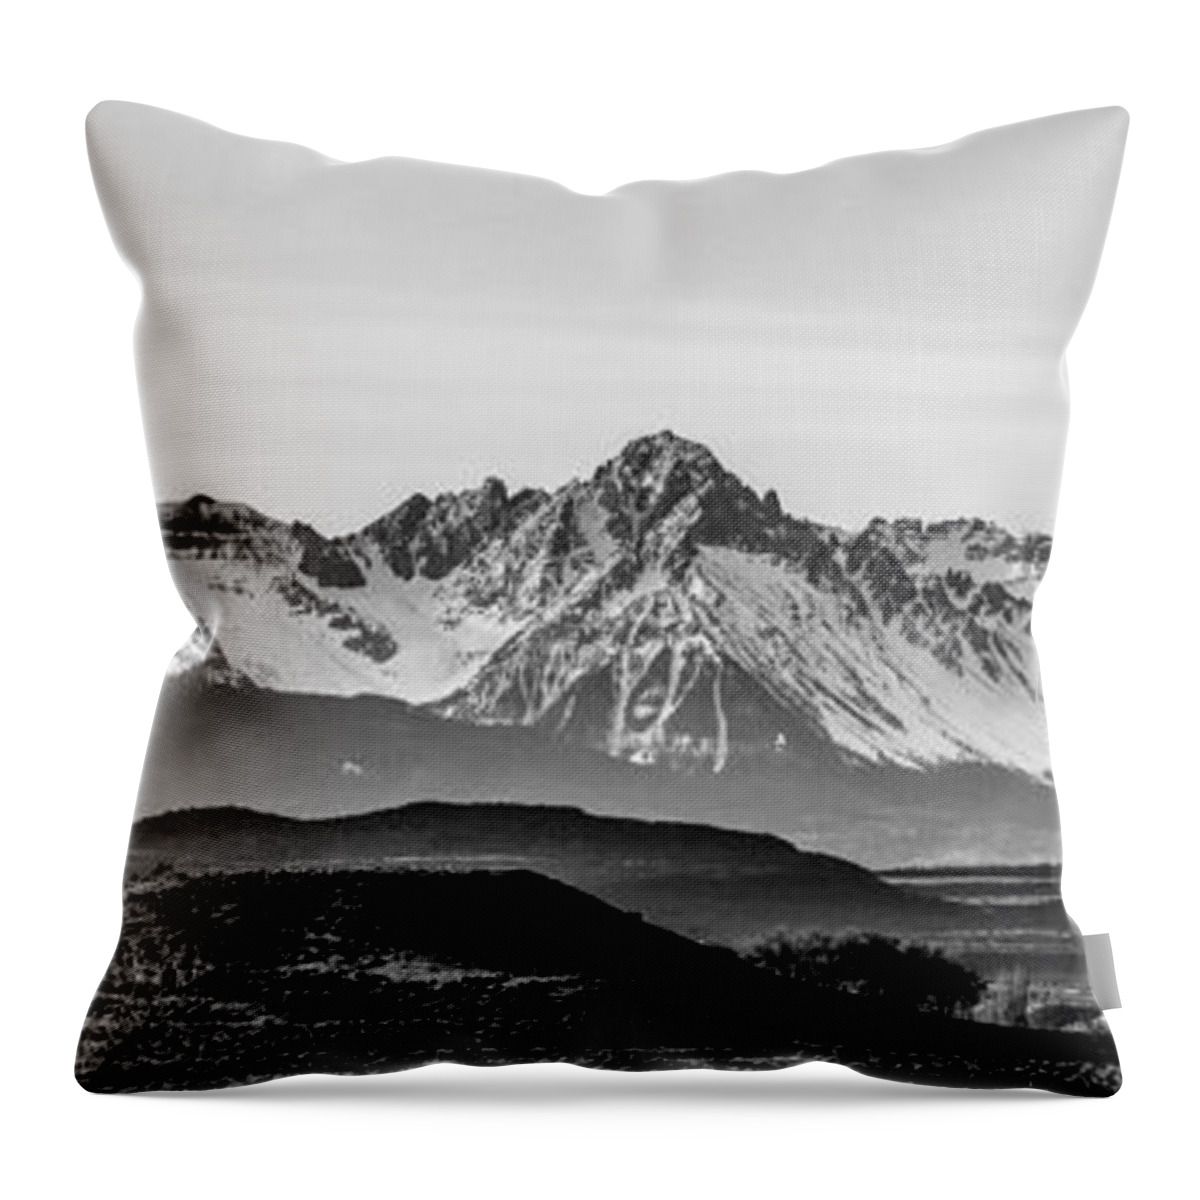 B&w Throw Pillow featuring the photograph At The Foothills Of Colorado Rockies #6 by Alex Grichenko